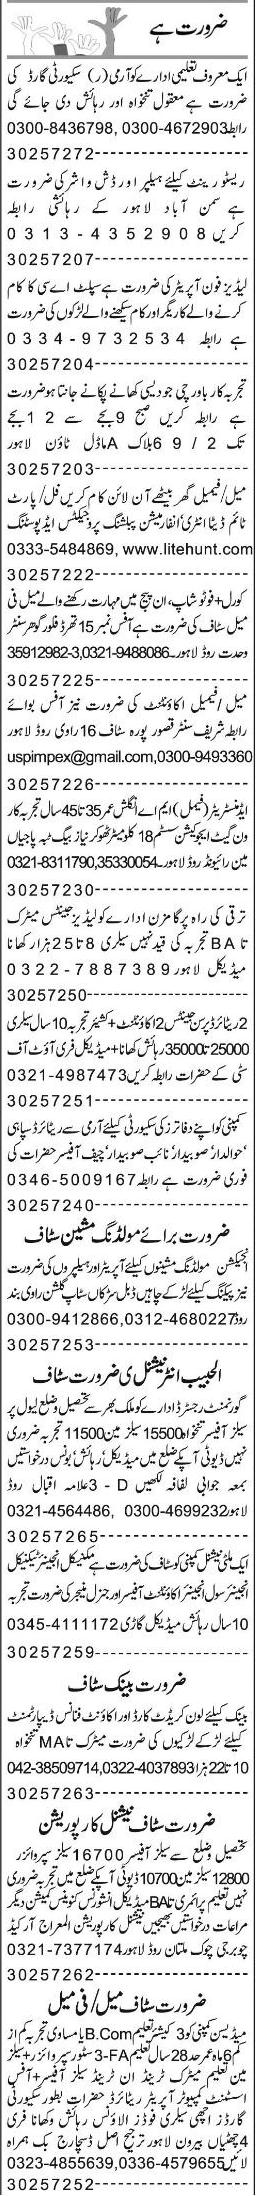 Misc. Jobs in Lahore Classified -1